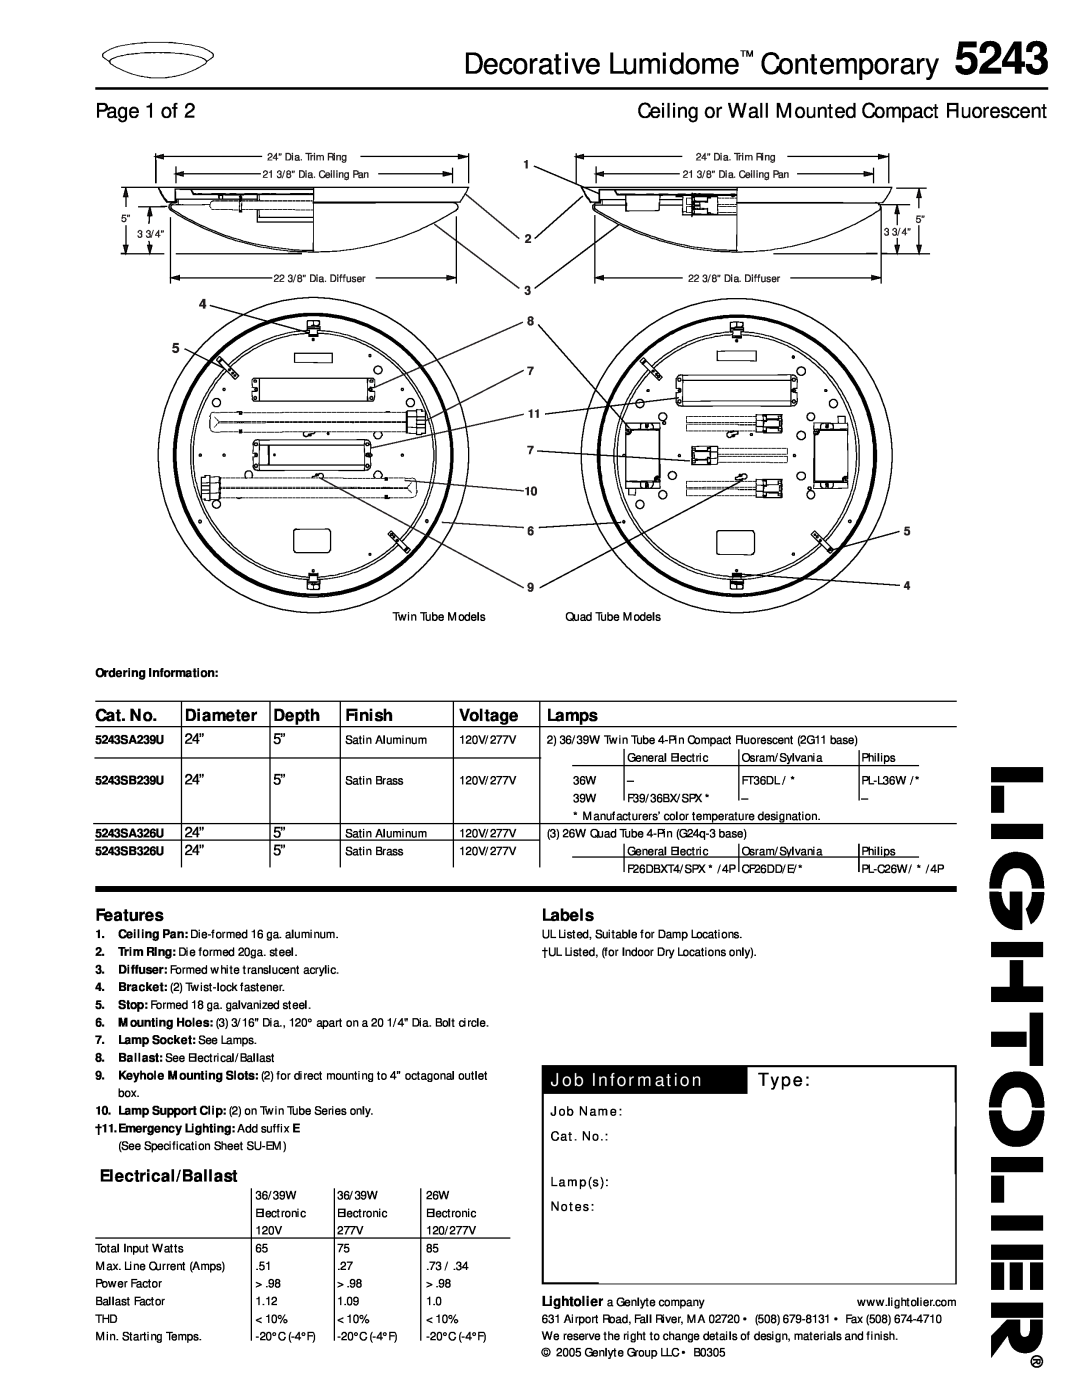 Lightolier 5243 specifications Decorative Lumidome Contemporary, Page 1 of, Ceiling or Wall Mounted Compact Fluorescent 